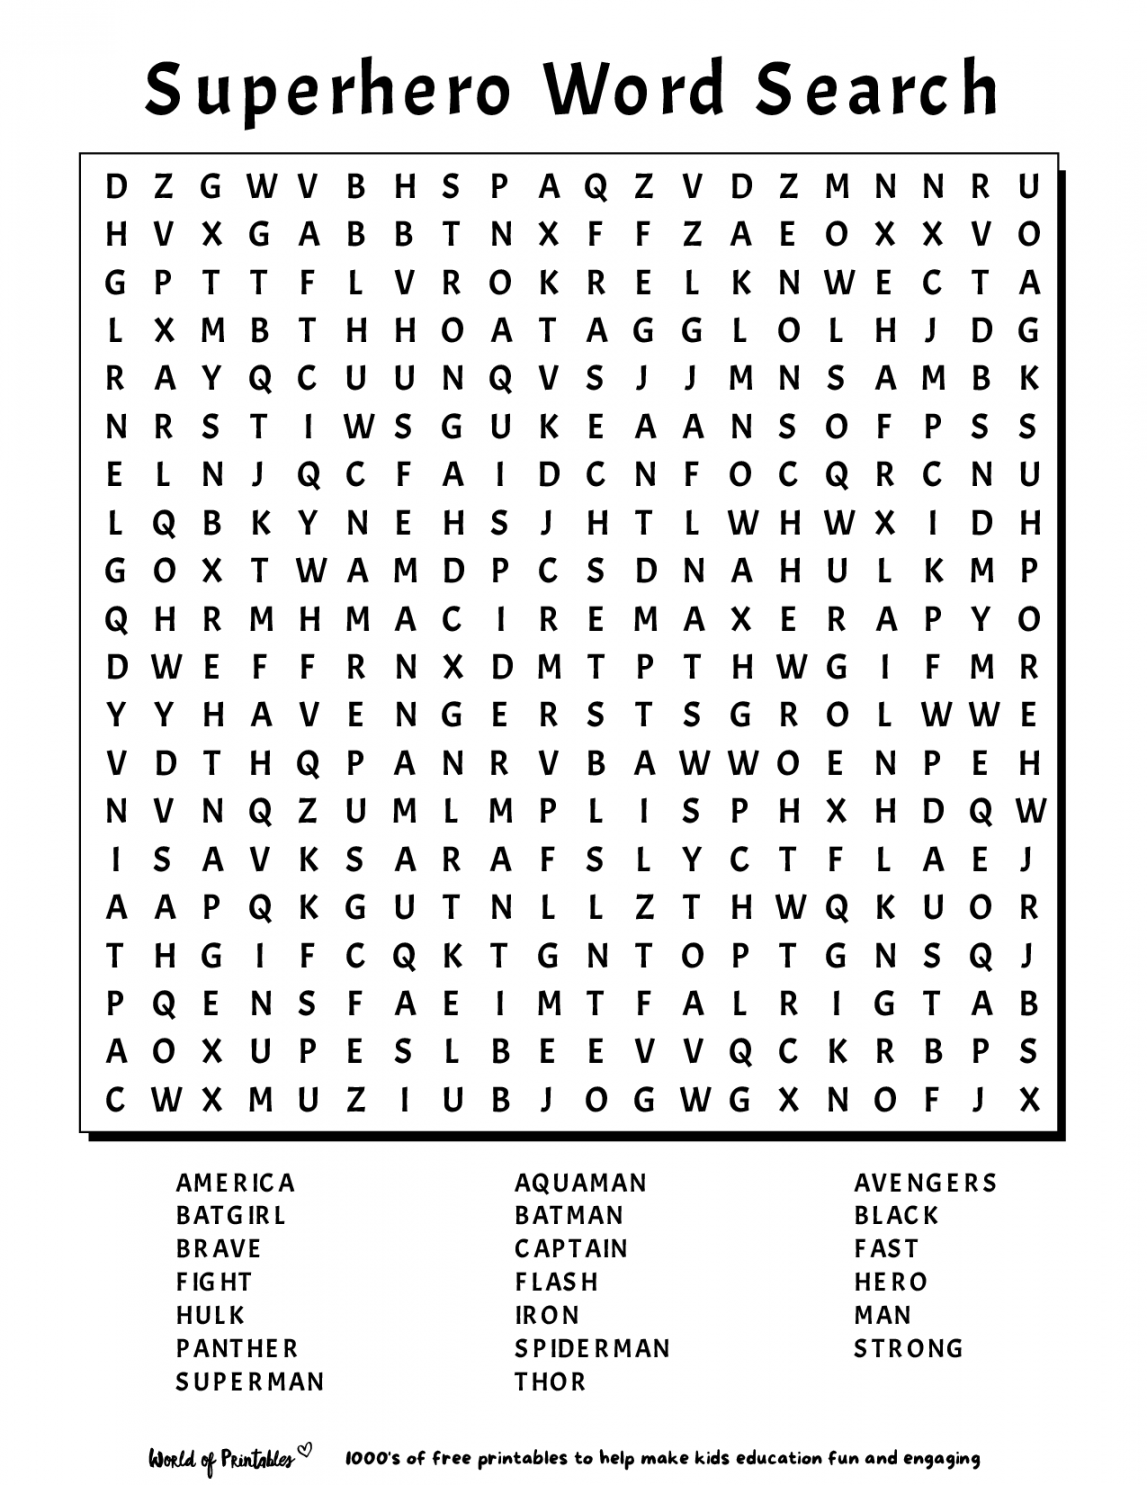 Word Search Puzzles Printable Free - Printable - Printable Word Search  World of Printables